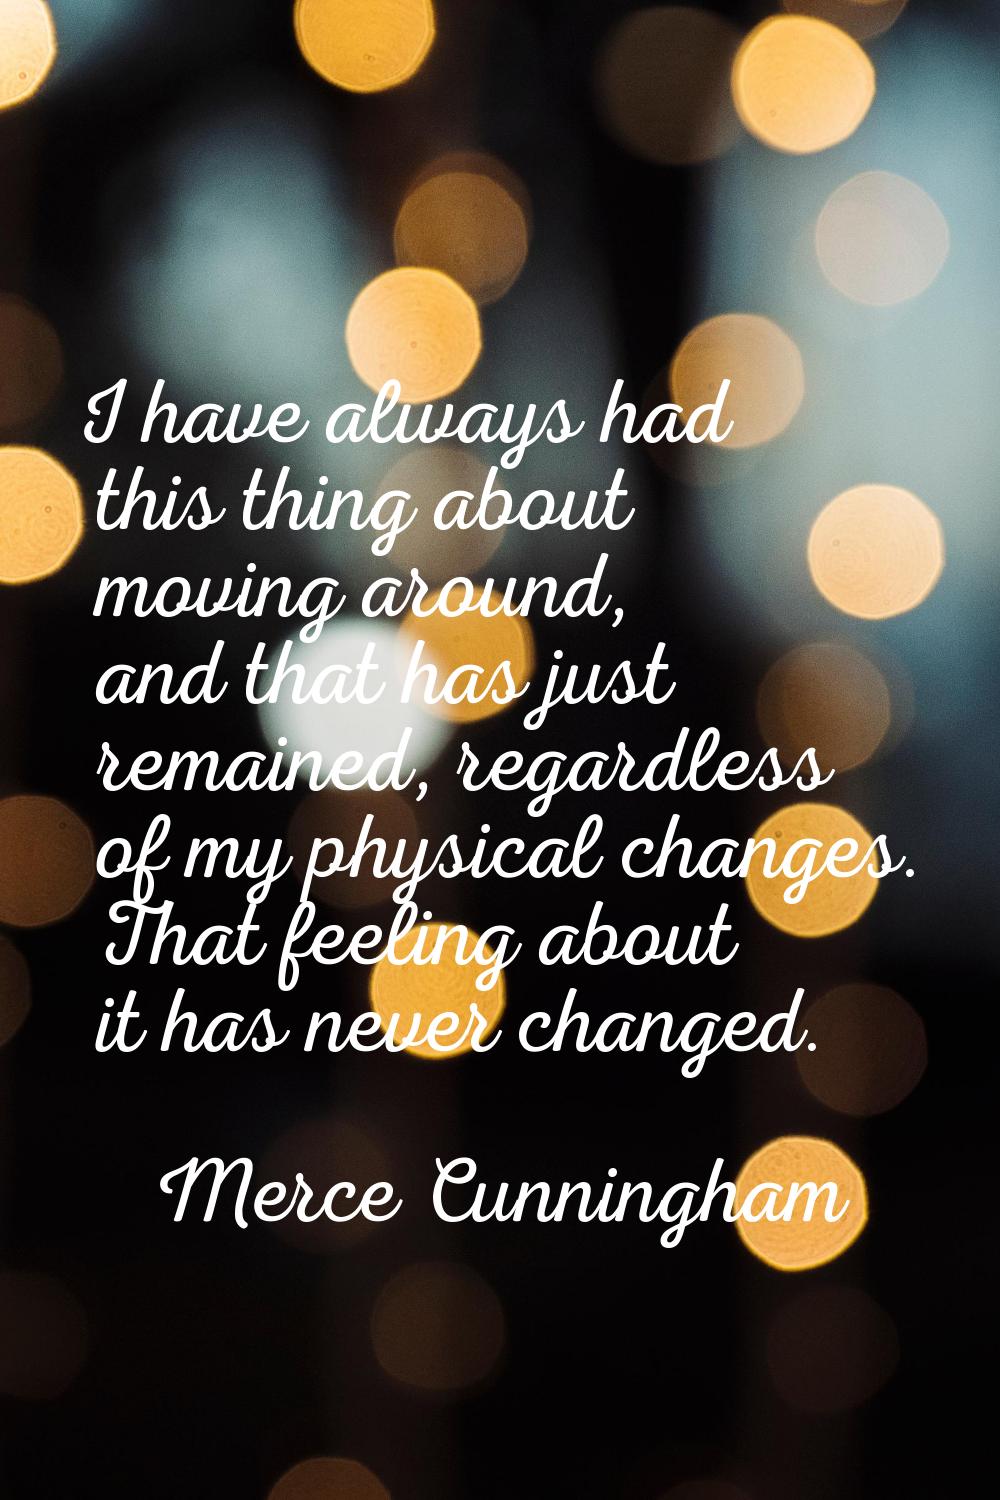 I have always had this thing about moving around, and that has just remained, regardless of my phys